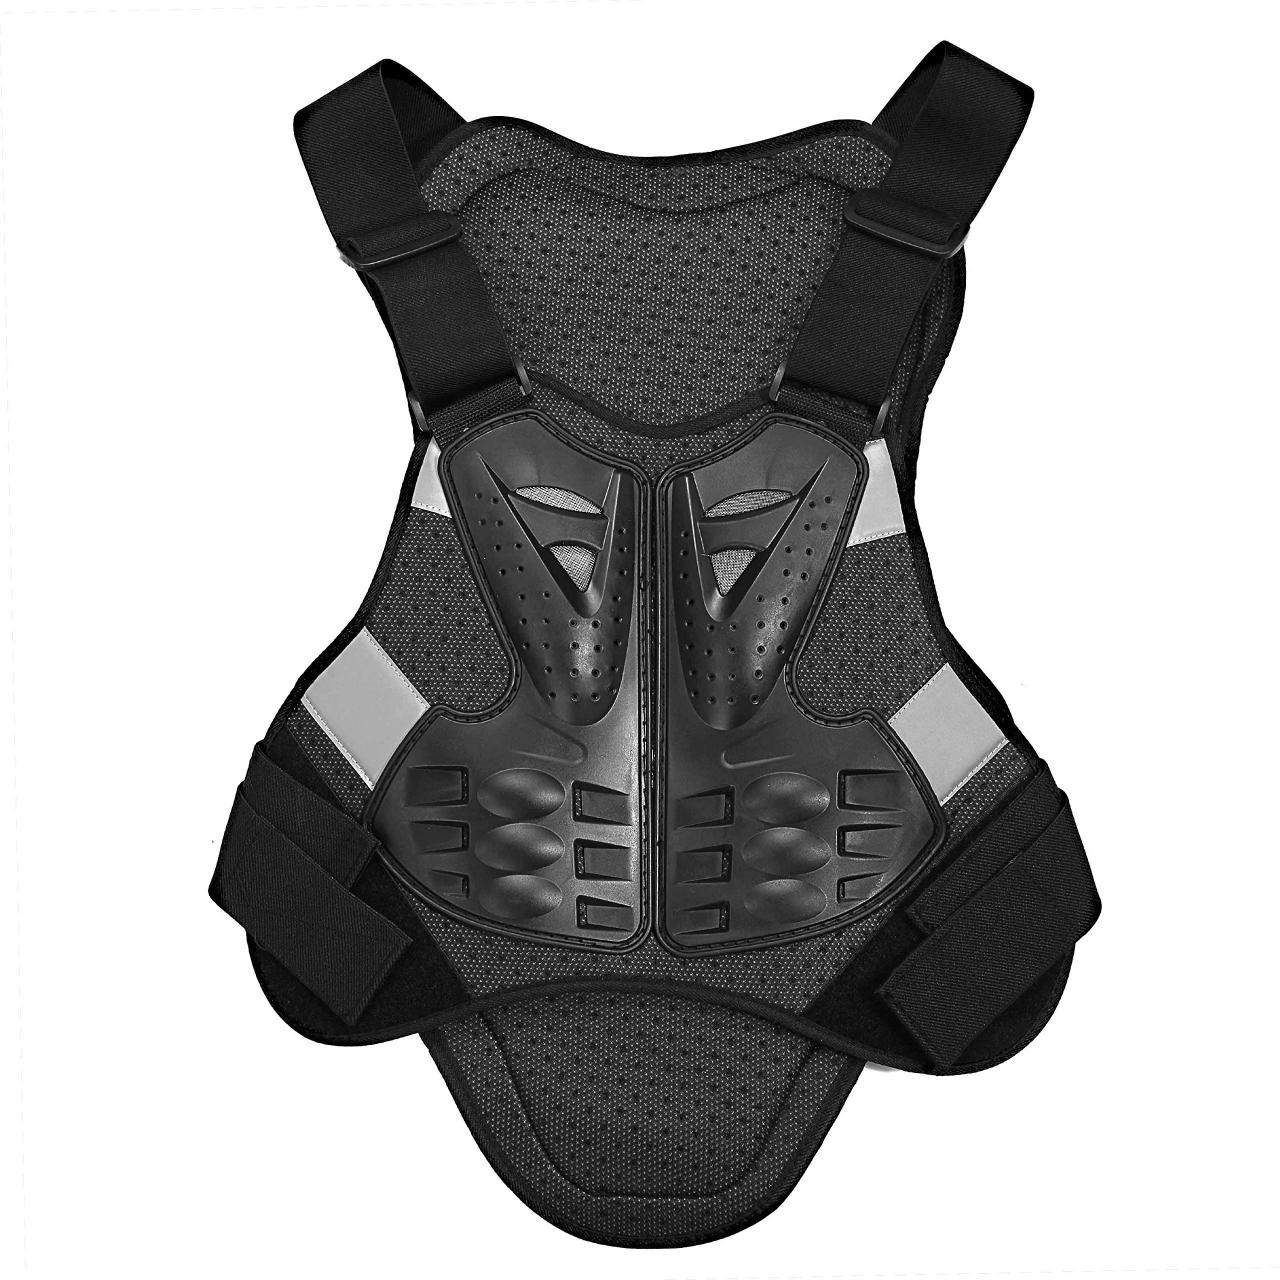 OHMOTOR Motorcycle Body Armor Motorbike Body Guard Vest Chest Back Protector  (Large)- Buy Online in Angola at angola.desertcart.com. ProductId :  78962930.